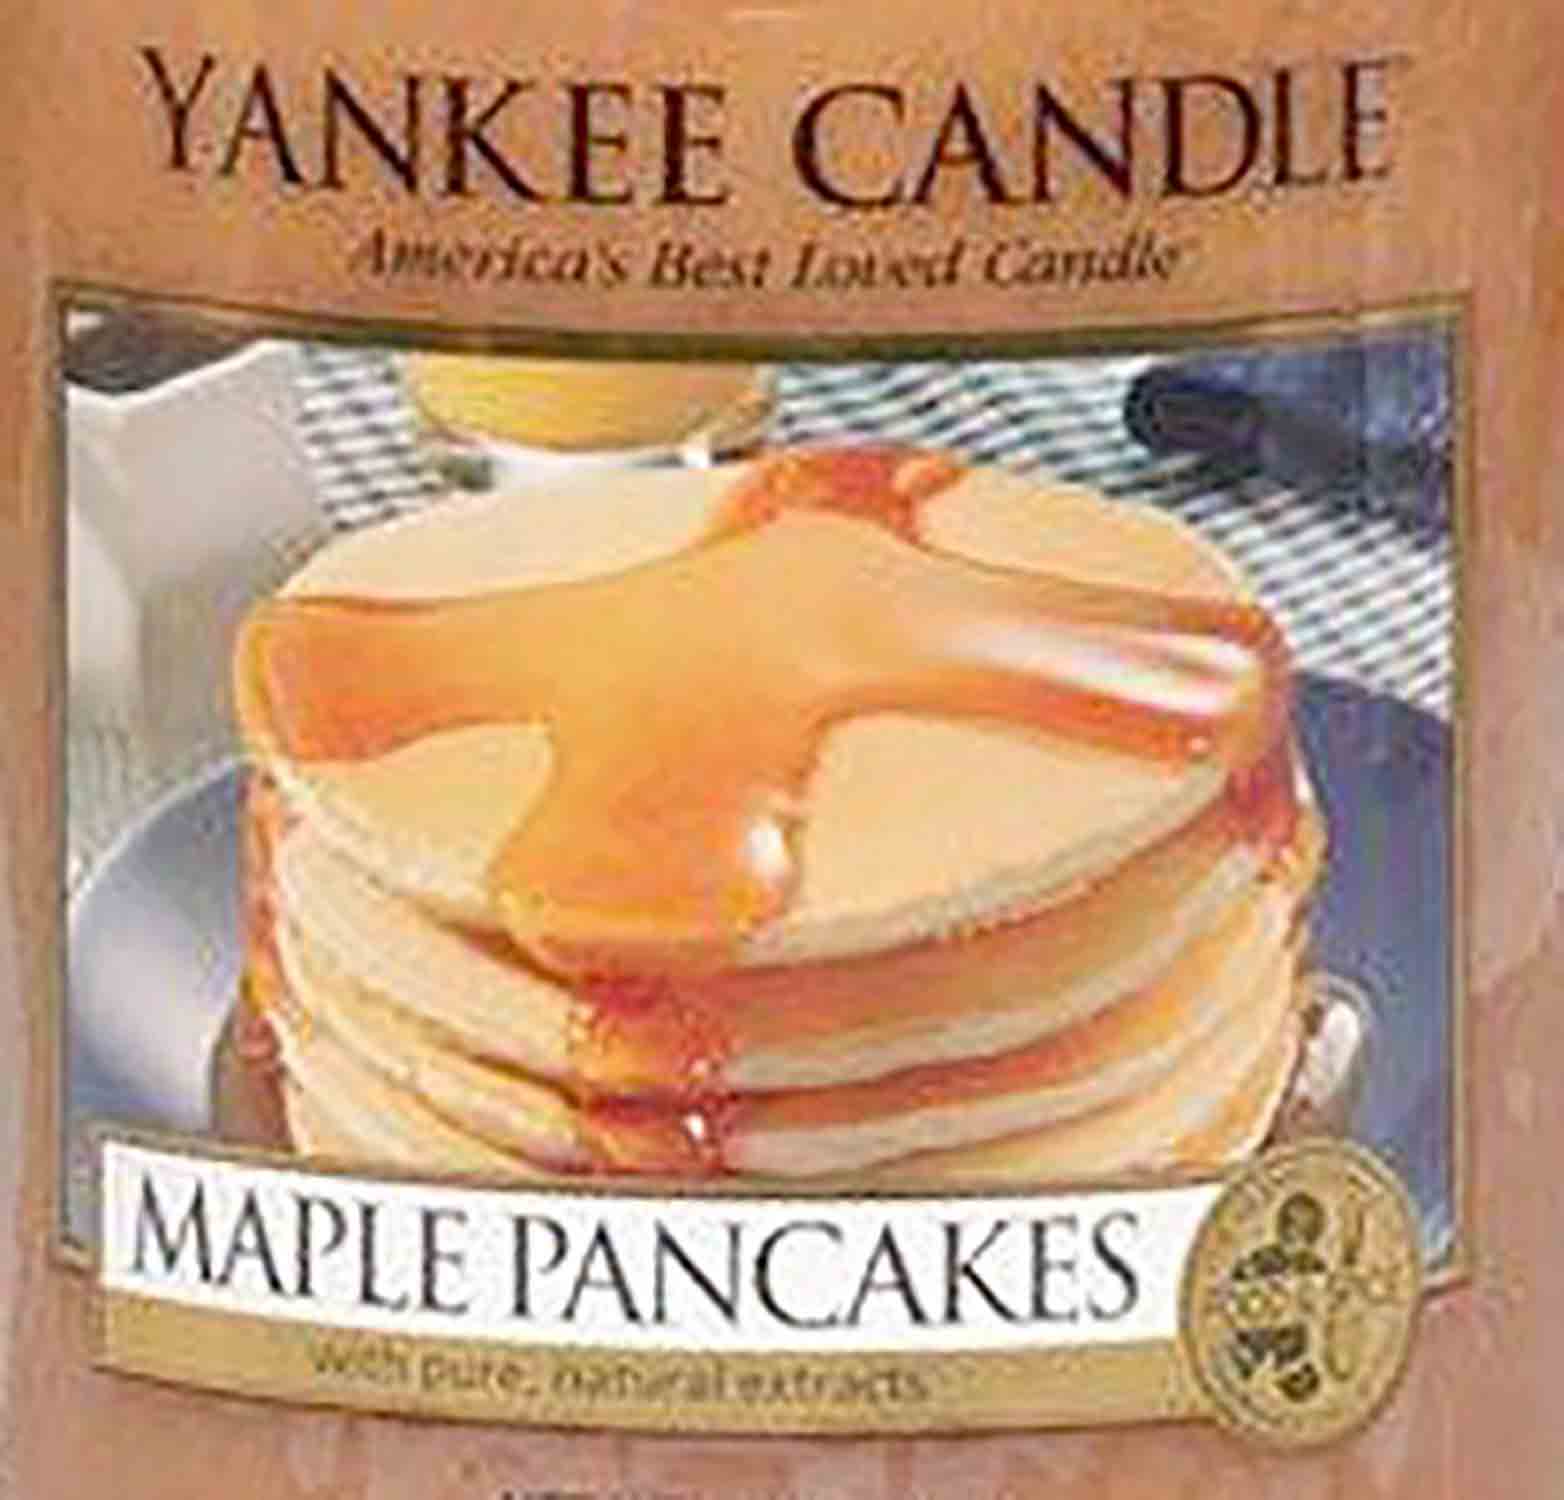 Yankee Candle Maple Pancakes USA 22 g - Crumble vosk